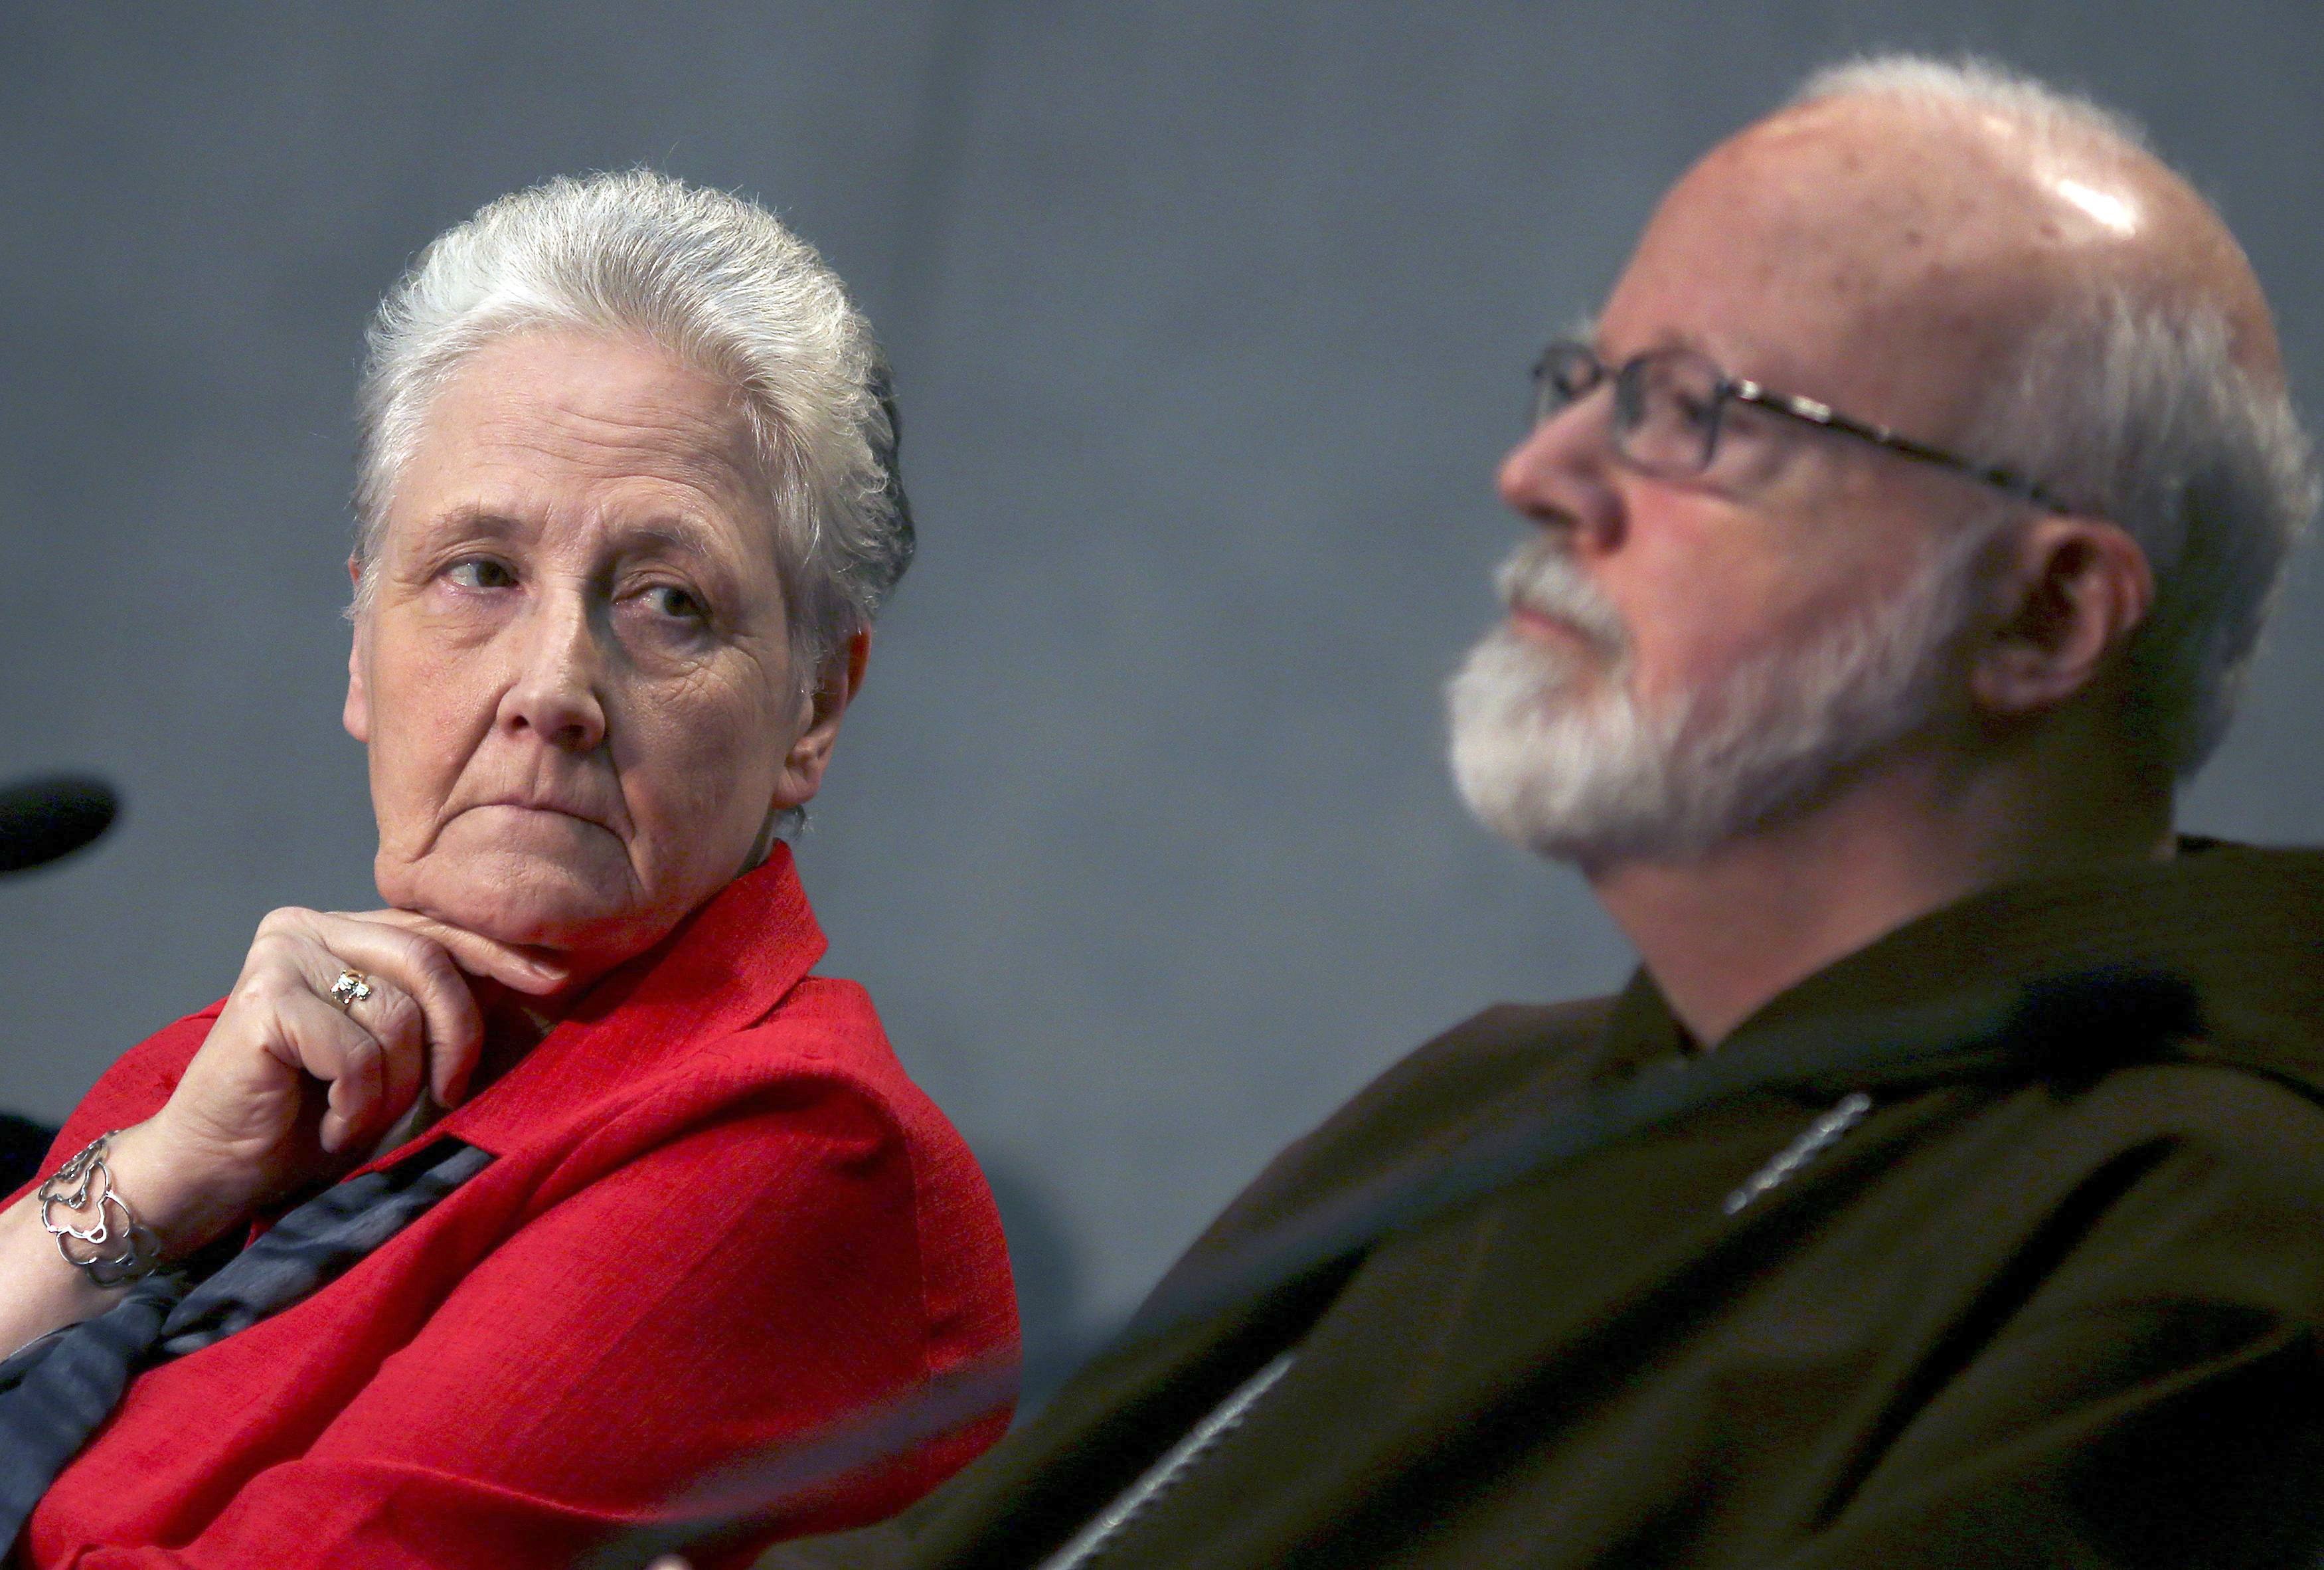 Irish abuse victim Marie Collins looks at Boston Cardinal Seán P. O'Malley during a briefing at the Holy See press office at the Vatican May 3, 2014. (CNS photo/Alessandro Bianchi, Reuters)